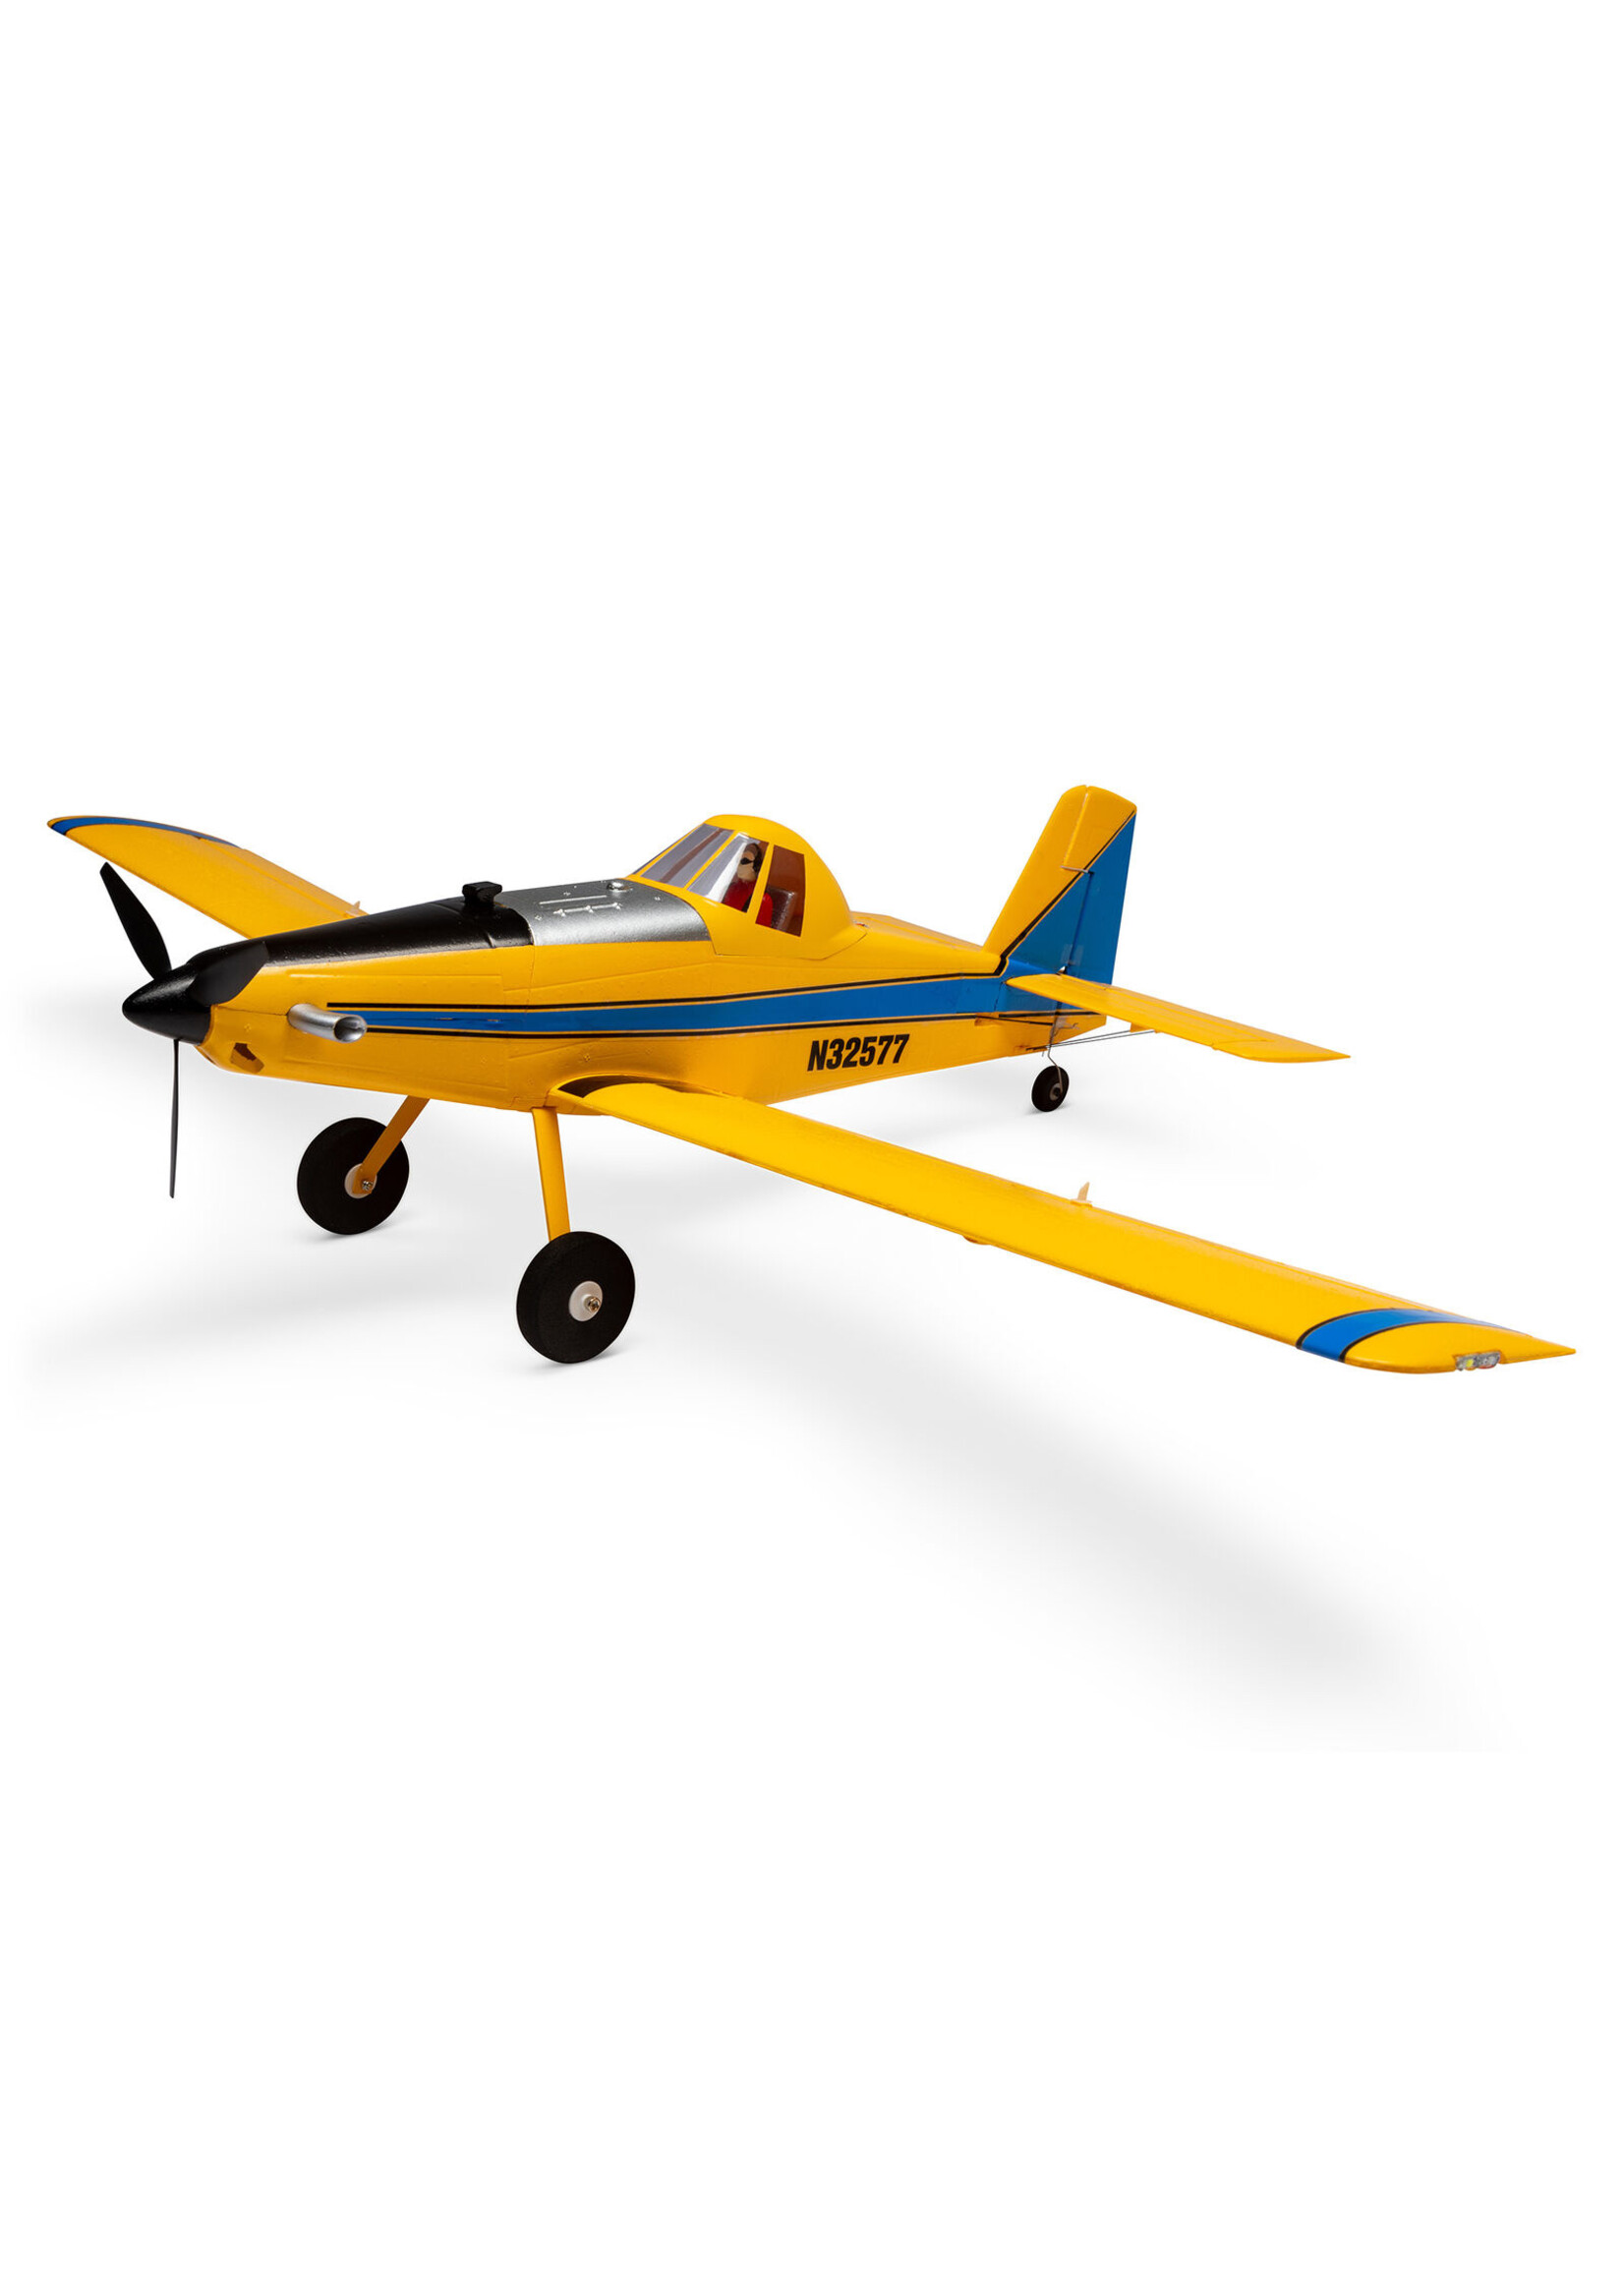 E-flite EFLU16450 - UMX Air Tractor BNF Basic with AS3X & SAFE Select